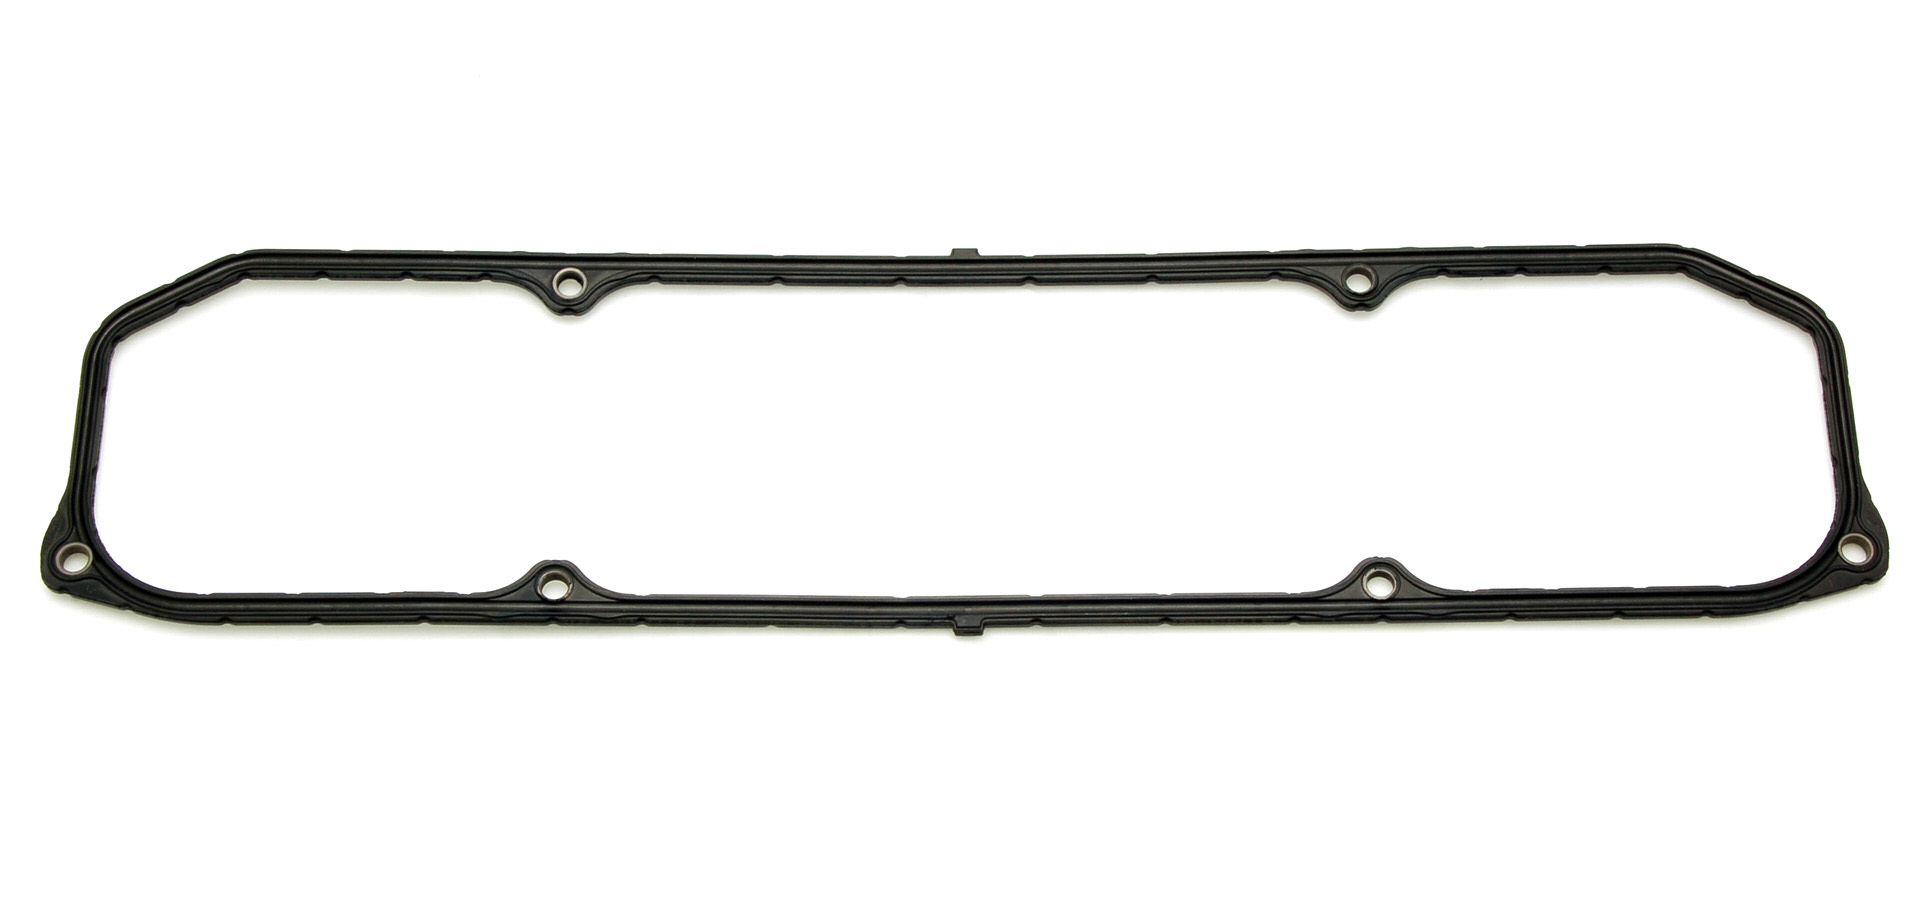 Cometic Gaskets C5983 Valve Cover Gasket, 0.188 in Thick, Rubber, Mopar B / RB-Series, Each